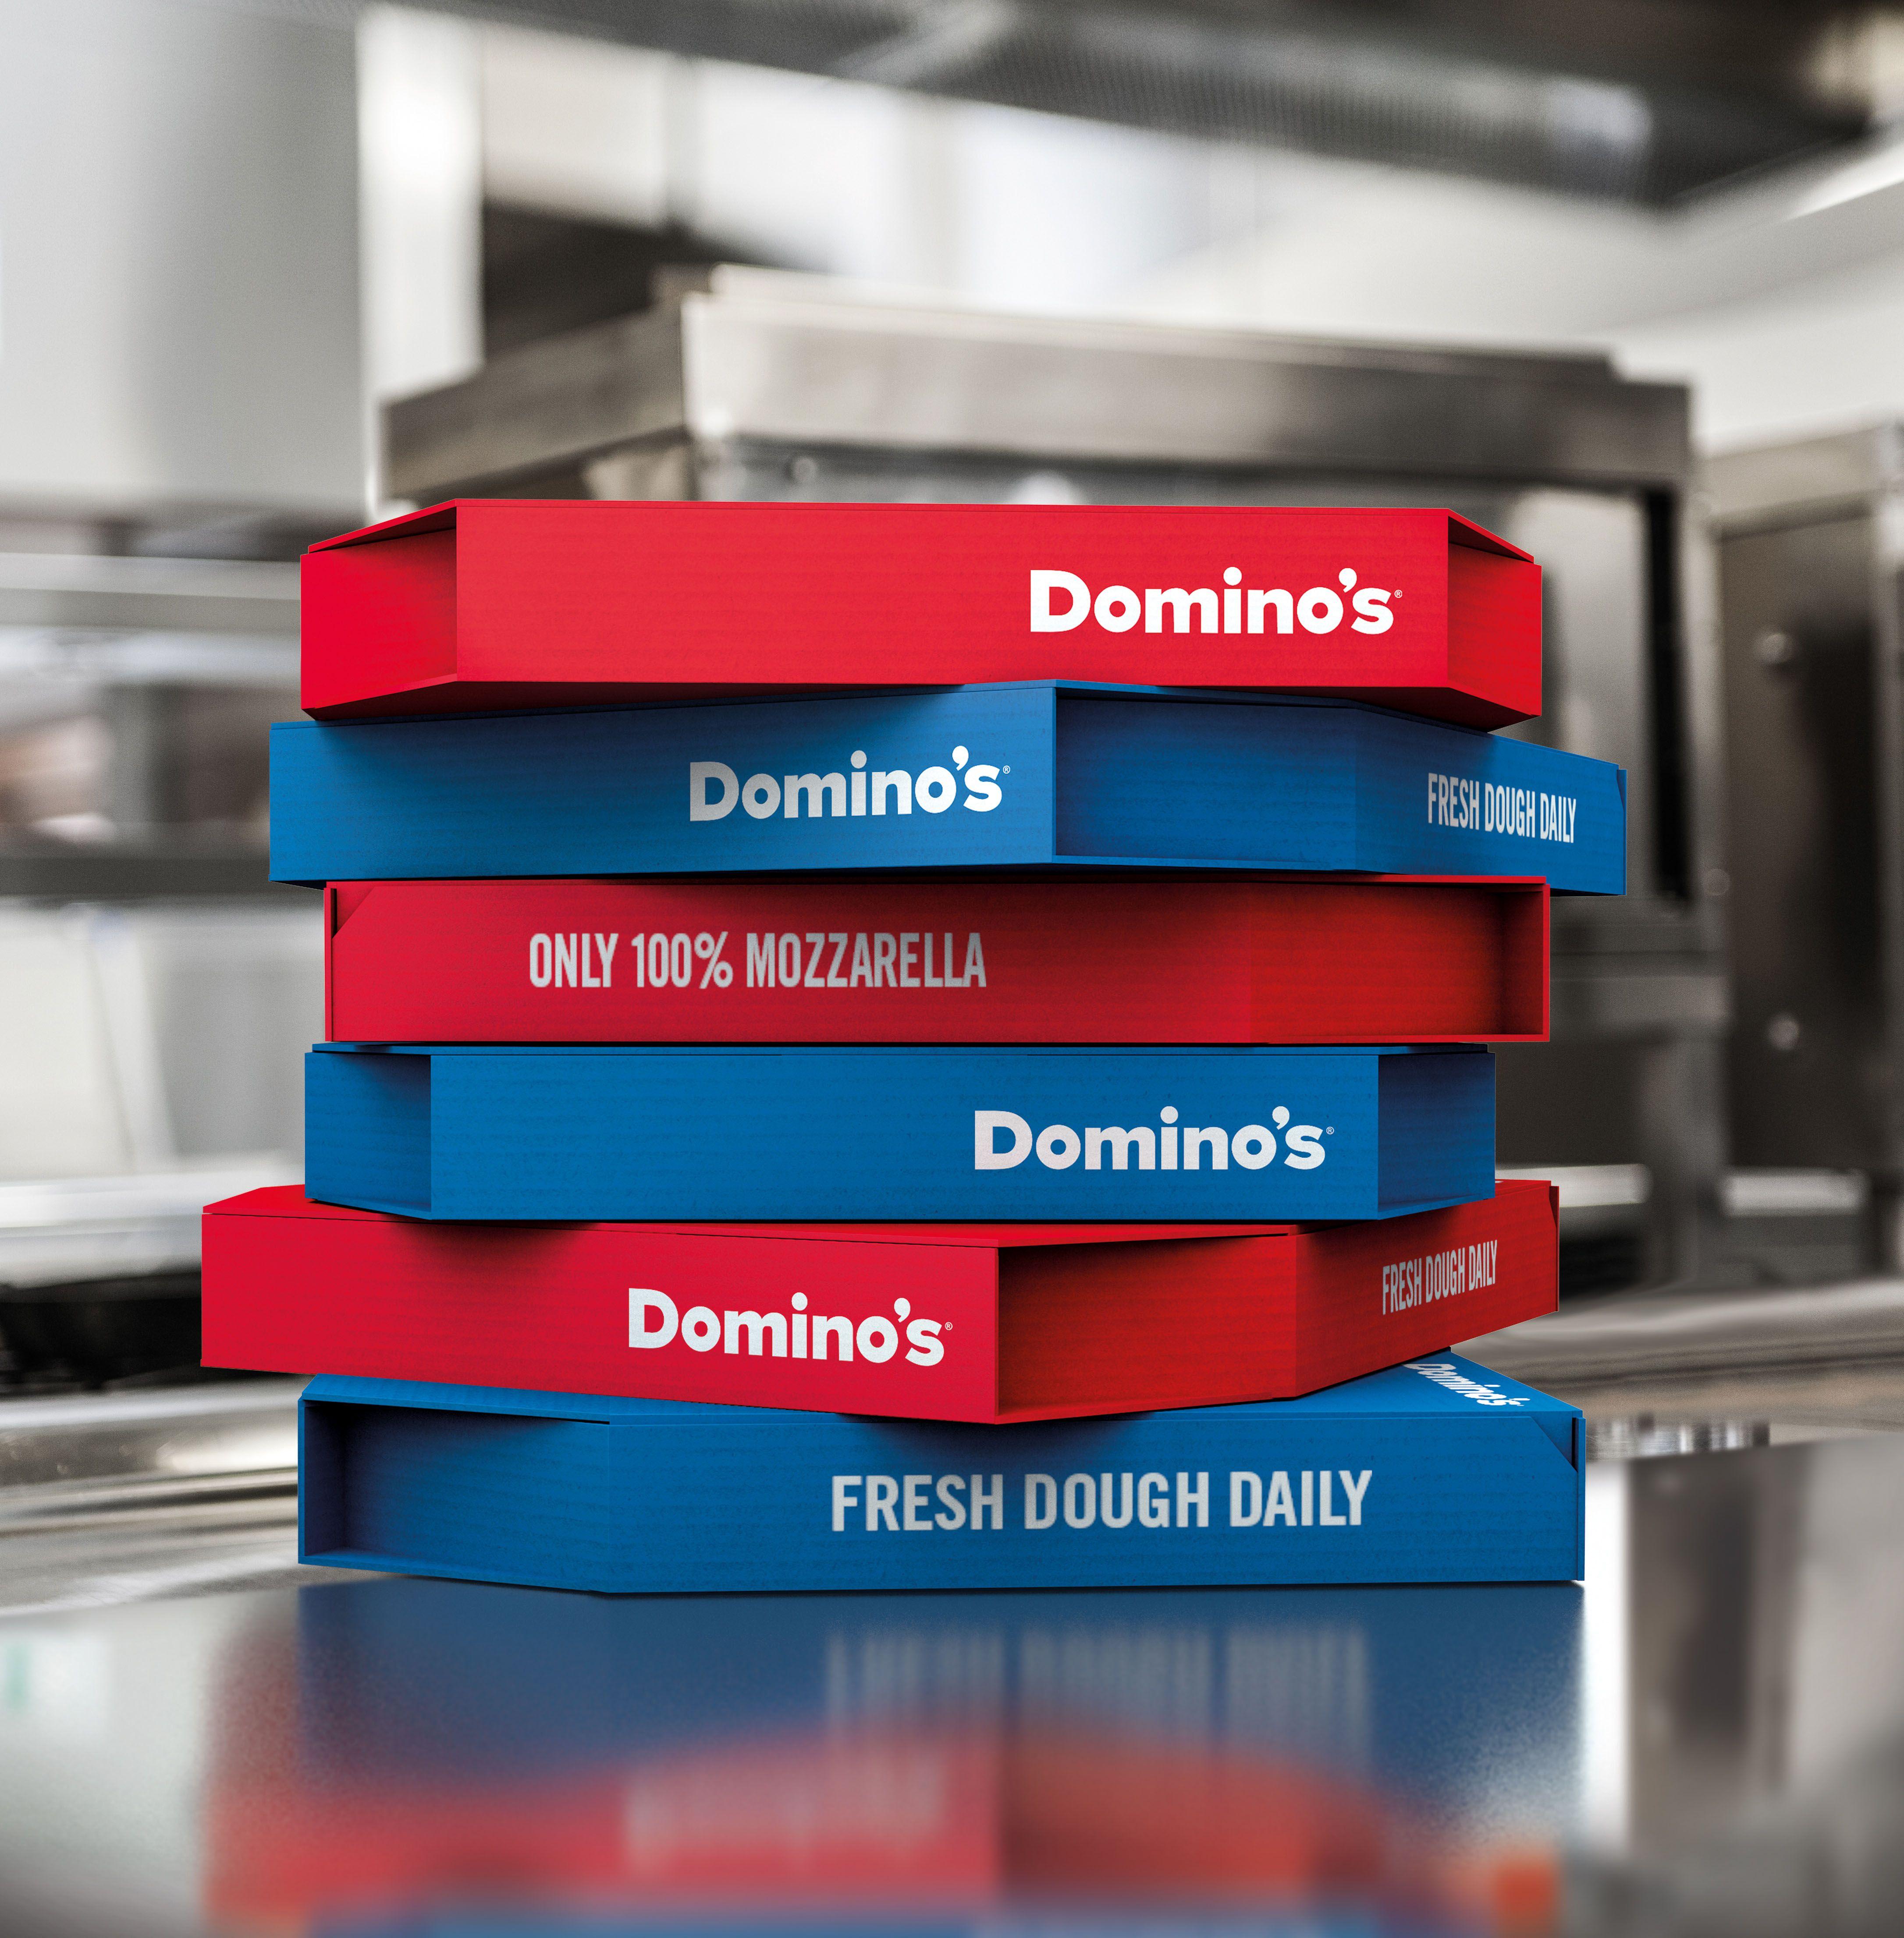 Red Domino Logo - JKR Redesigns Domino's Packaging To Highlight Two Pizza Deals